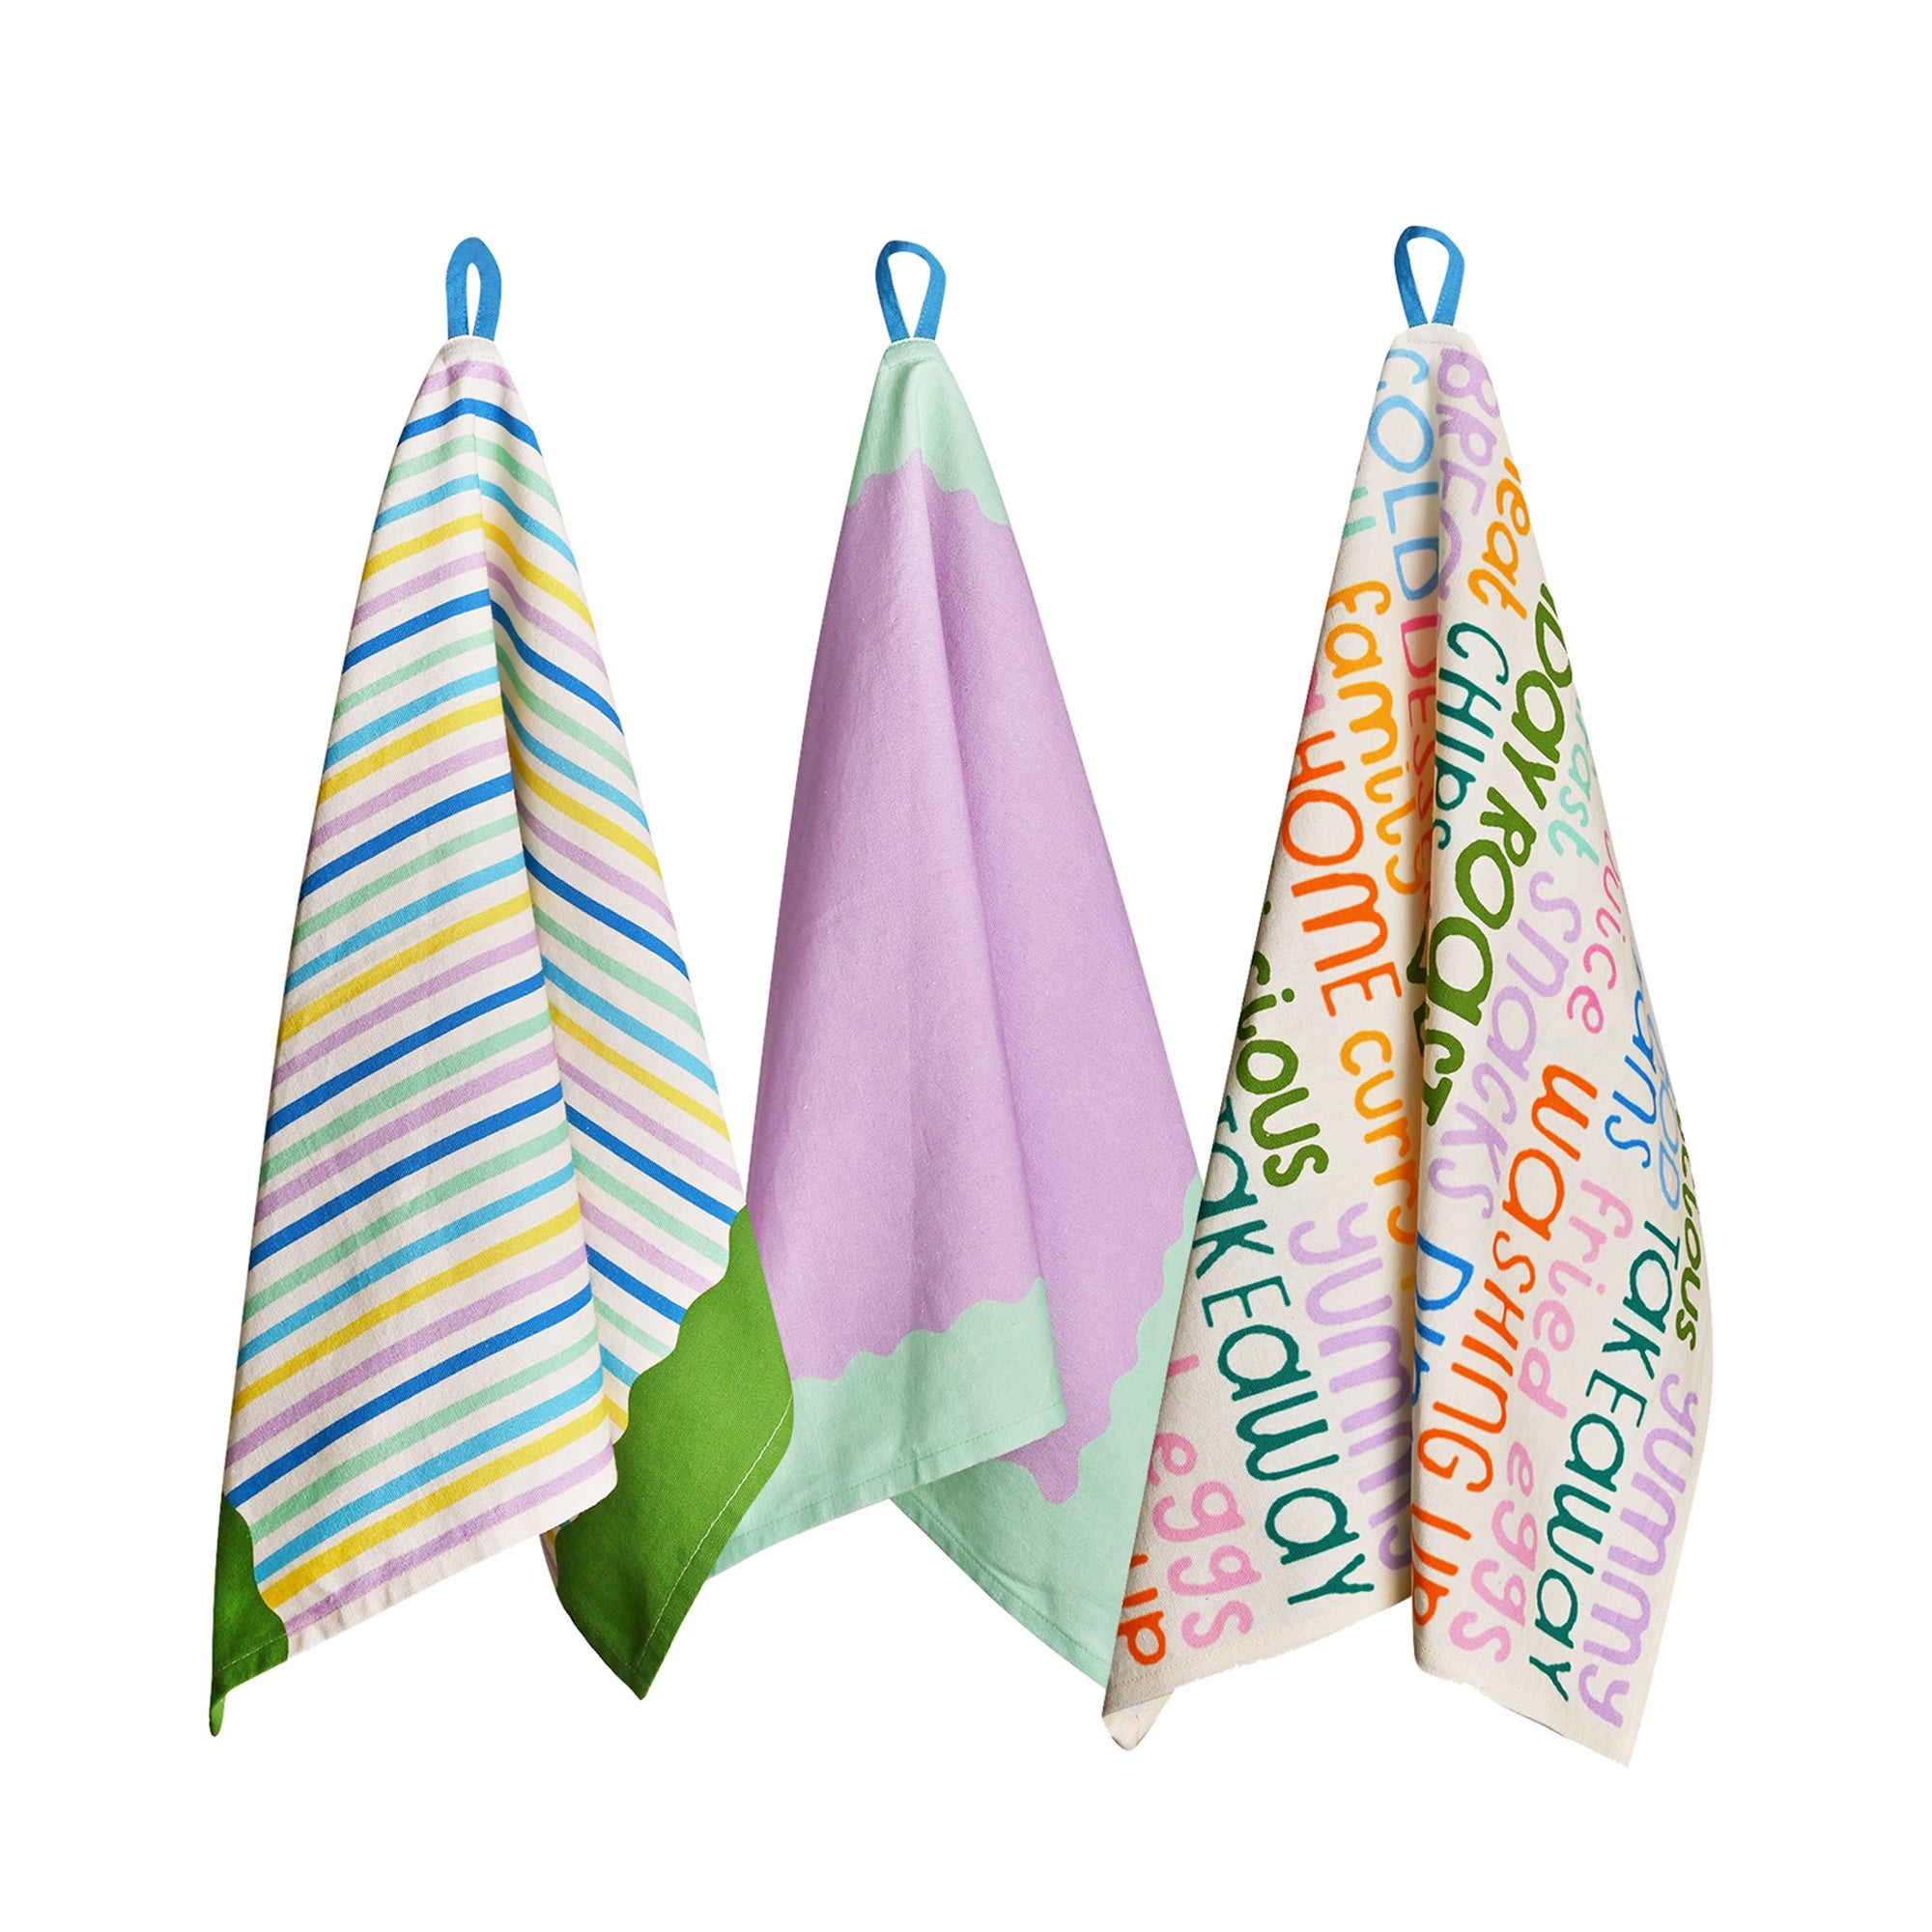 Raspberry Blossom Set of 3 Cotton Printed Tea Towels with Hanging Loop